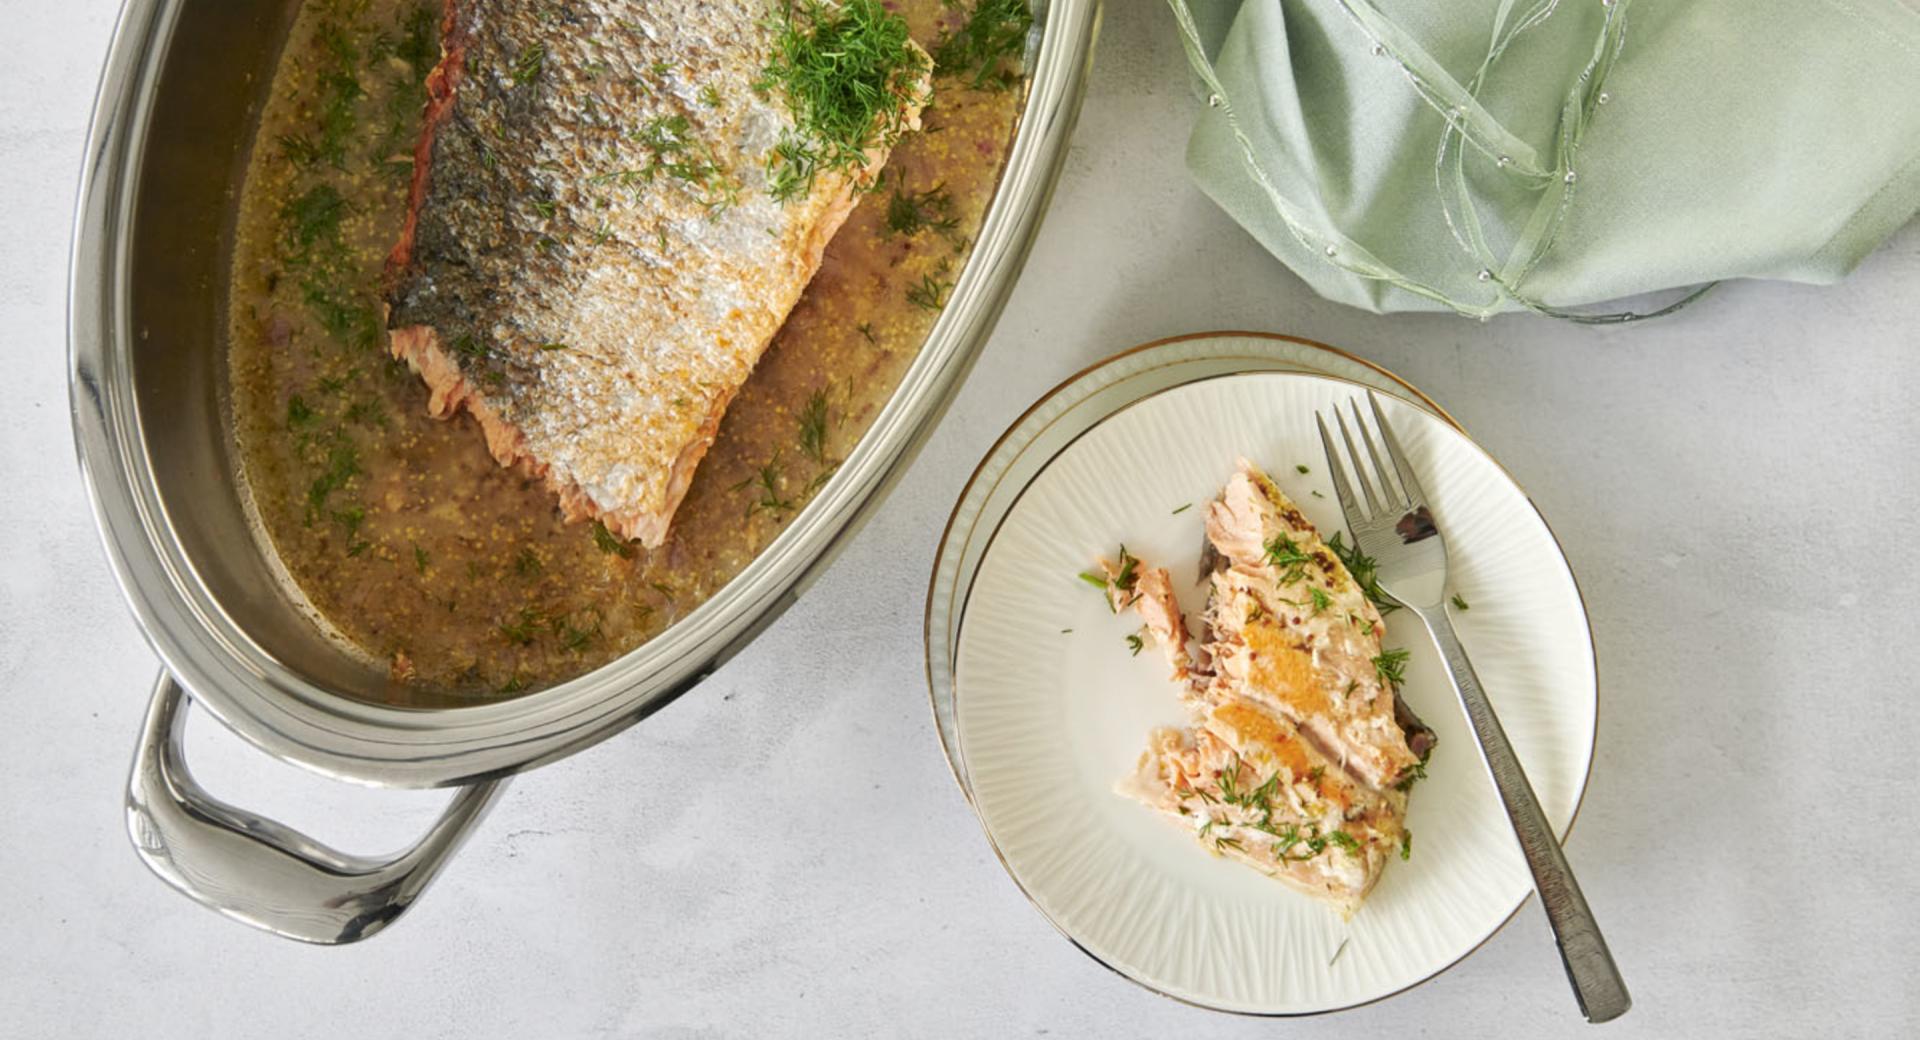 Roasted salmon fillet with cider and mustard